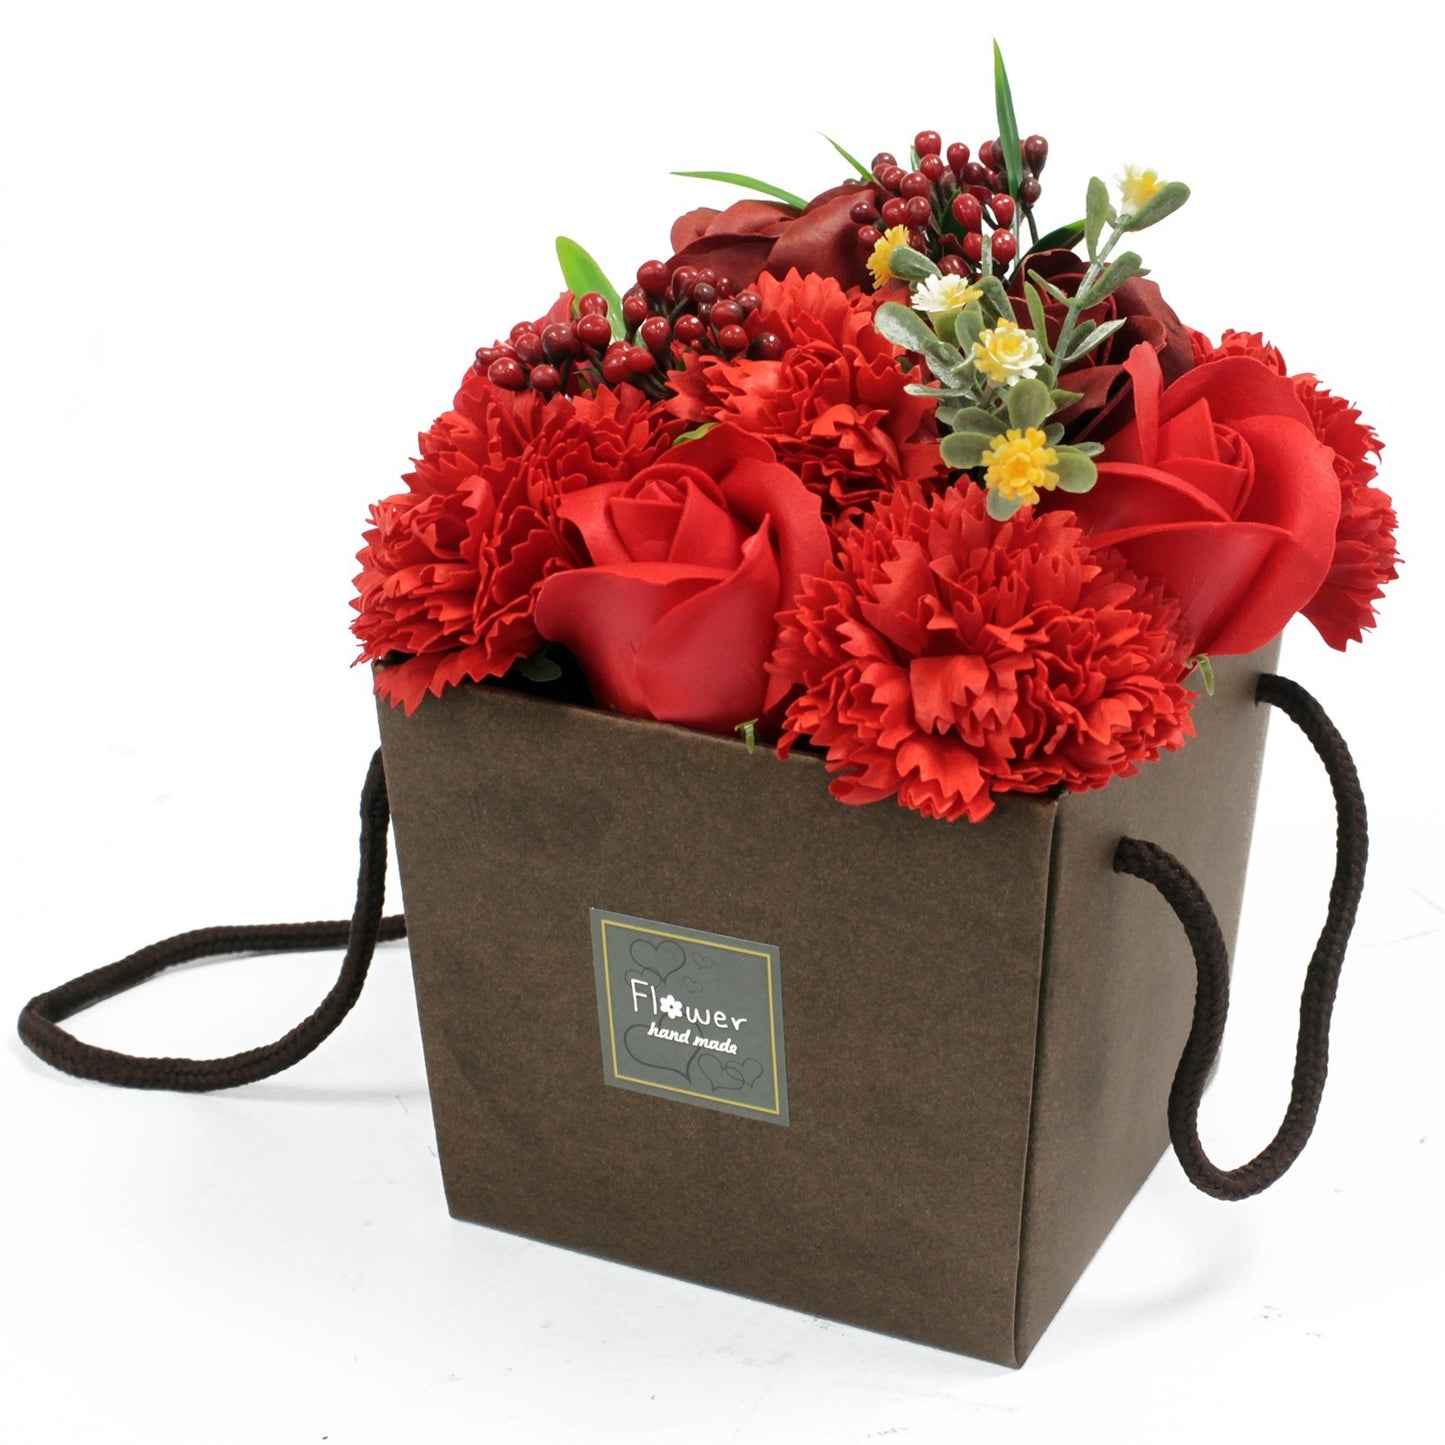 Soap Flower Bouquet - Red Roses and Carnations